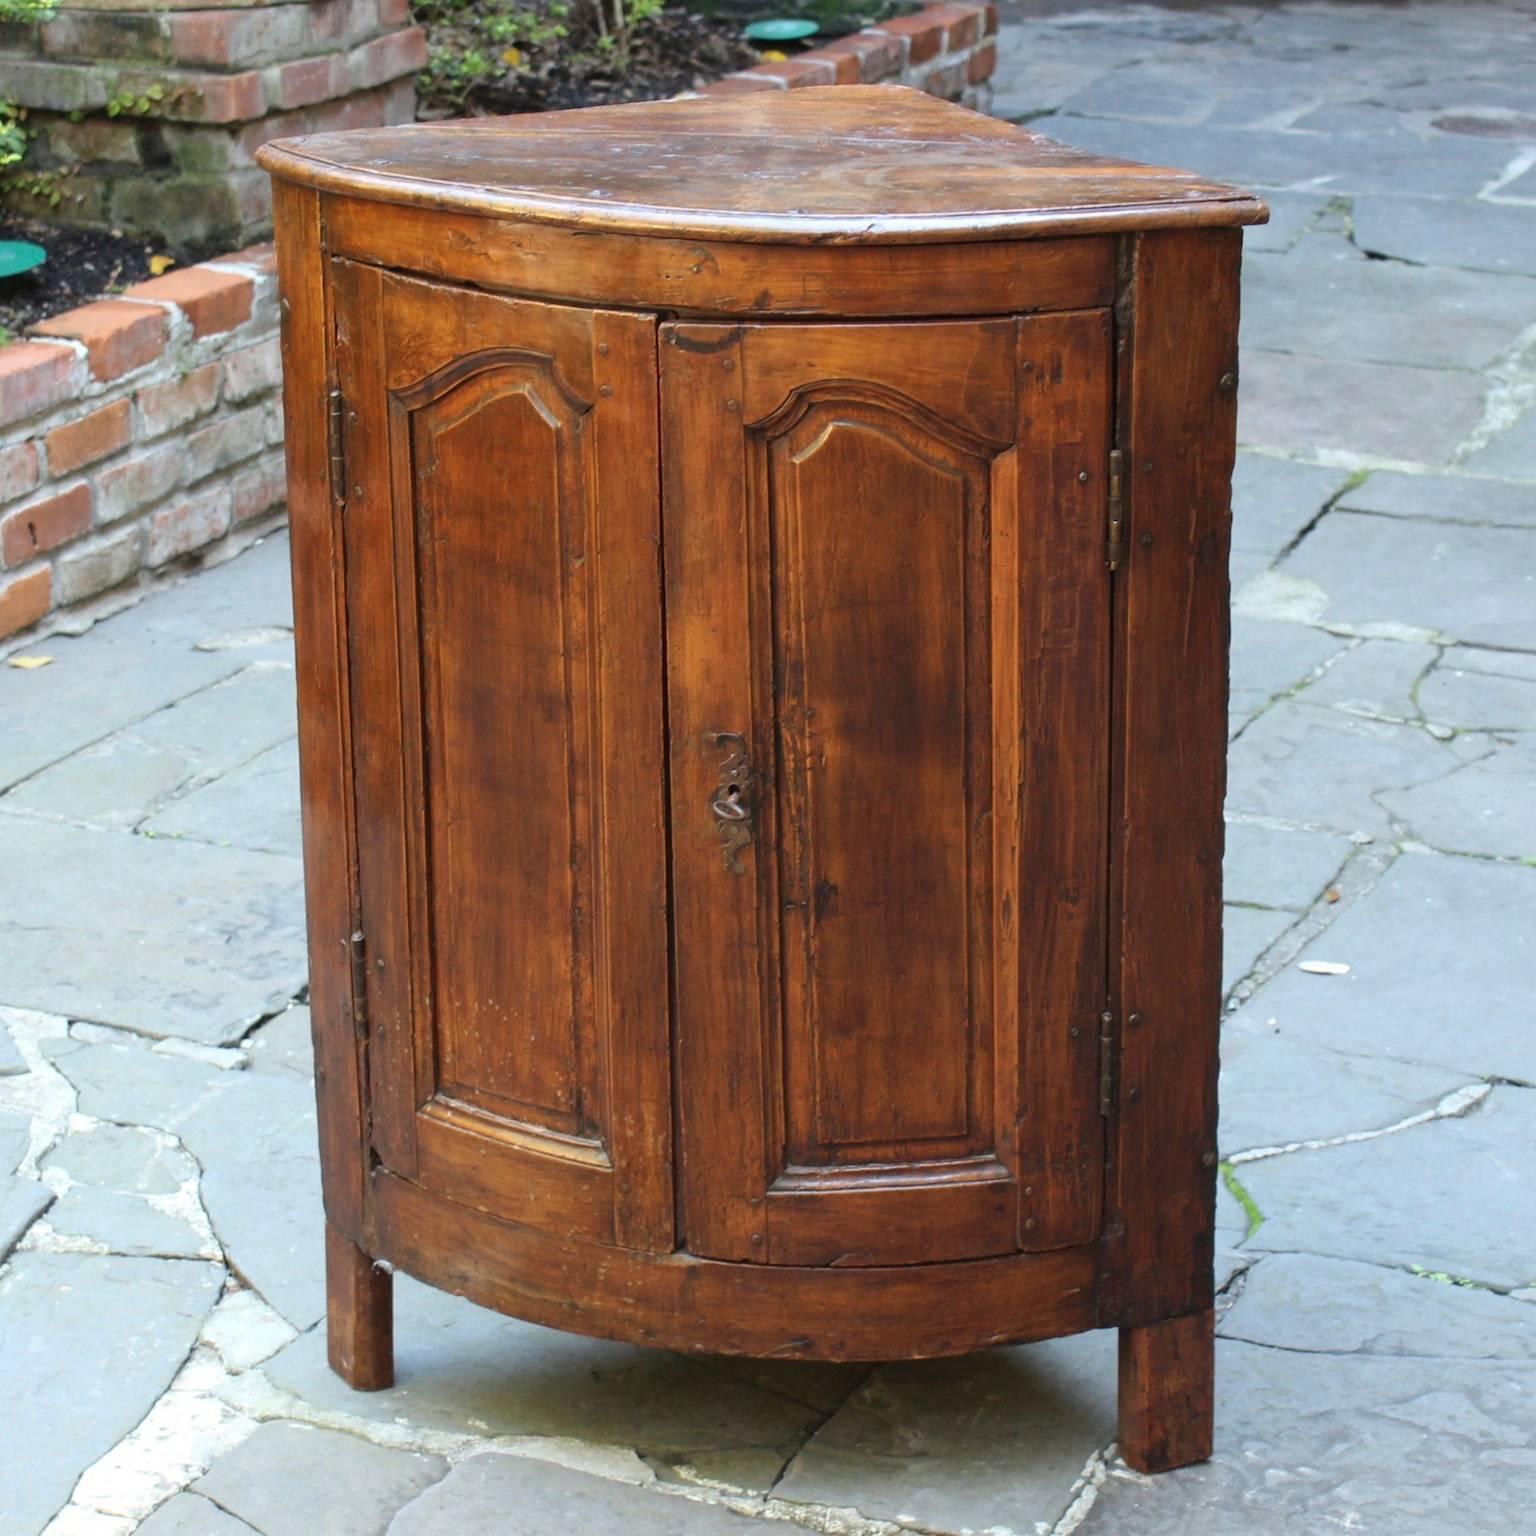 Antique French 19th century Encoignure (corner cabinet) with curved front and doors, detailed carvings, and original hardware.